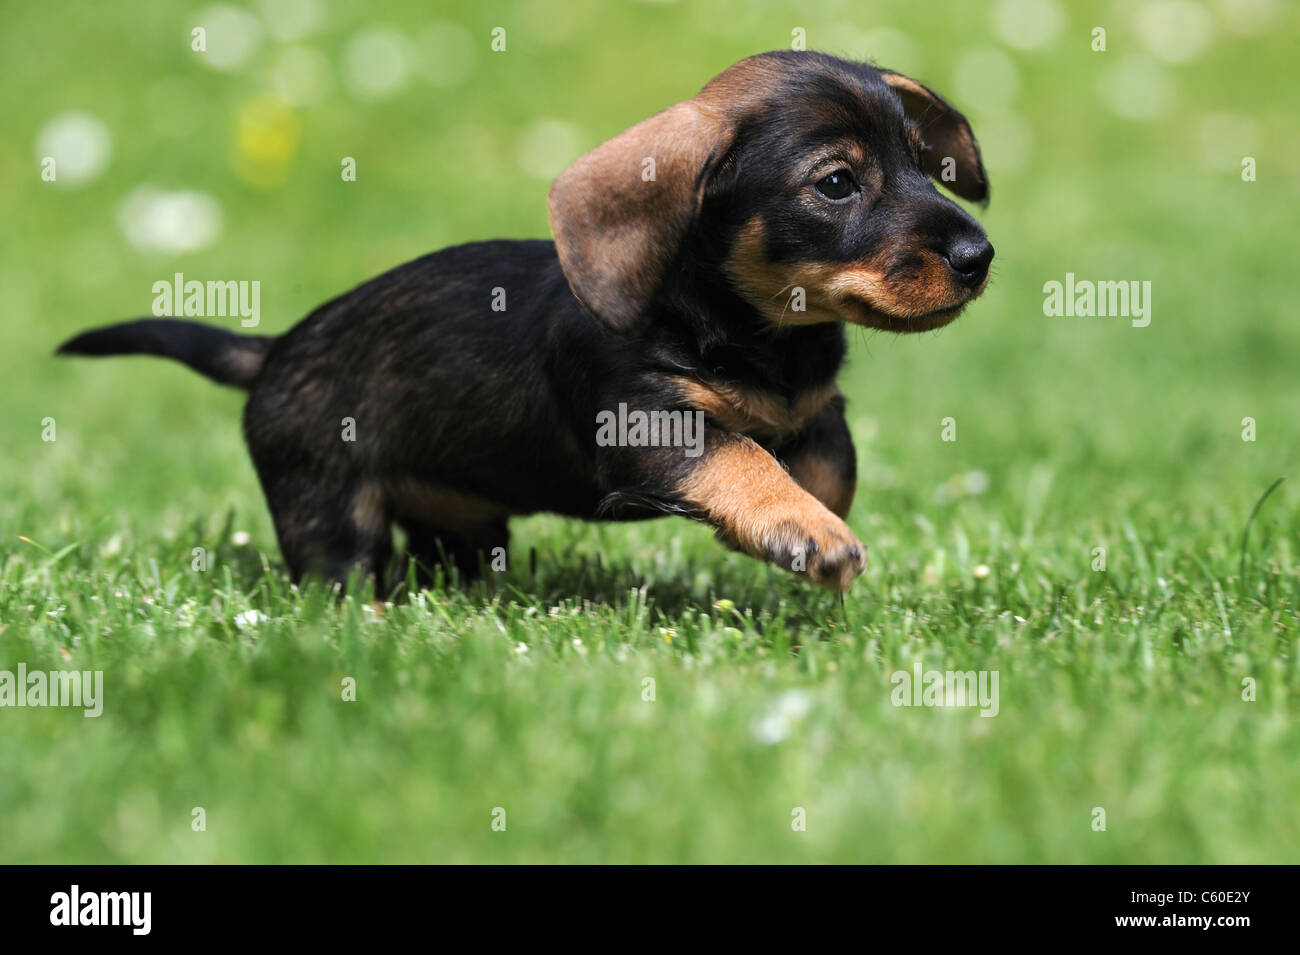 Wire-haired Dachshund (Canis lupus familiaris). Puppy running on a lawn. Stock Photo